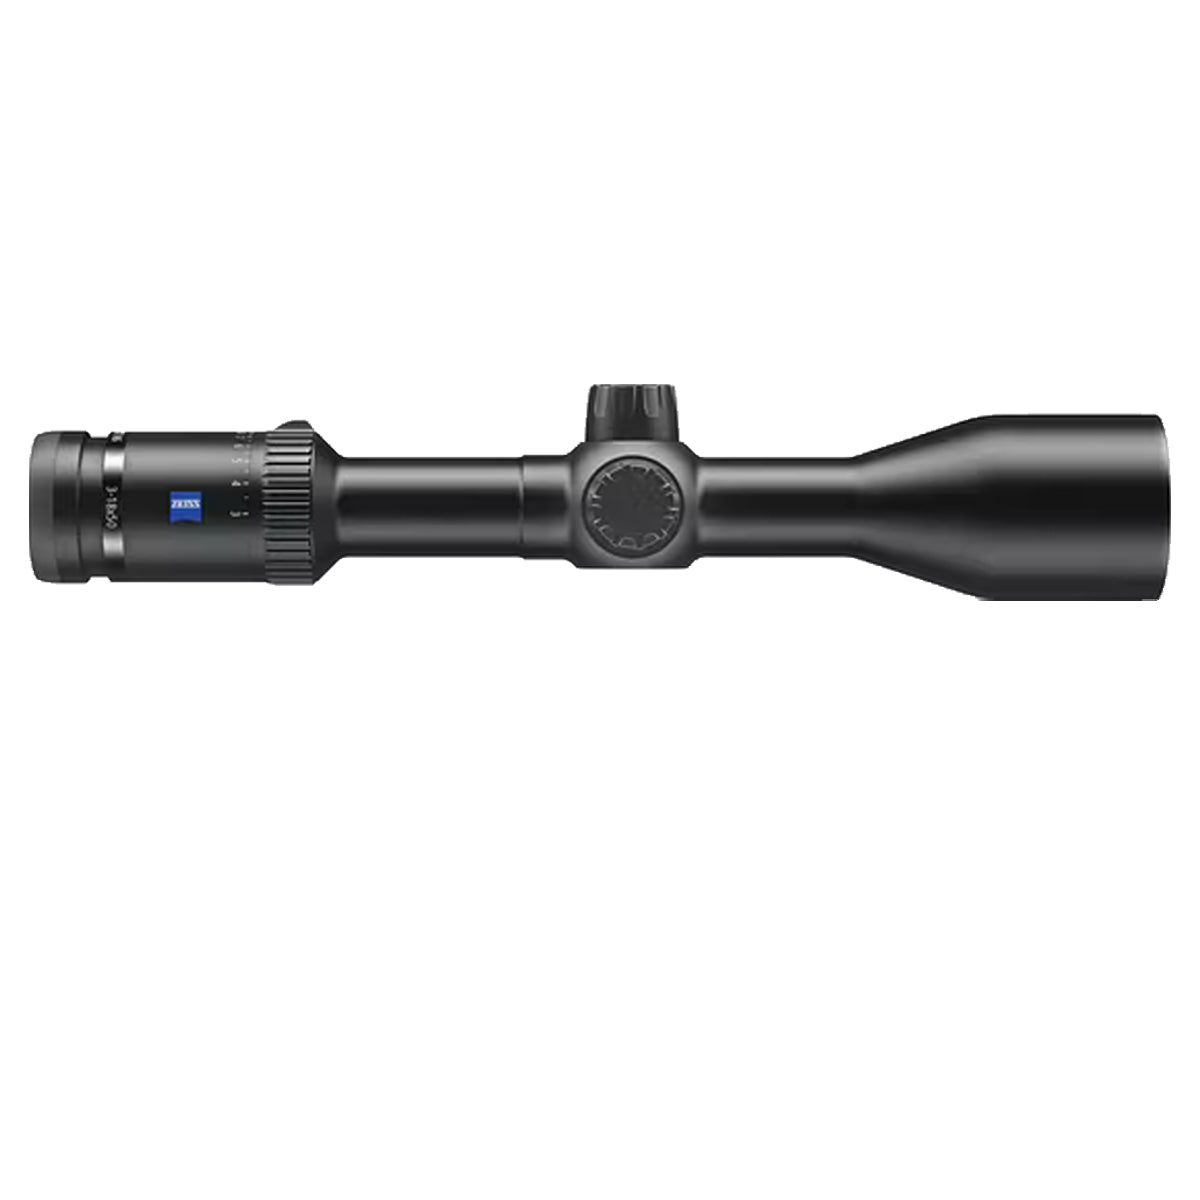 Zeiss Conquest V6 3-18x50 w/ZMOA-2 #94 Reticle Riflescope in  by GOHUNT | Zeiss - GOHUNT Shop